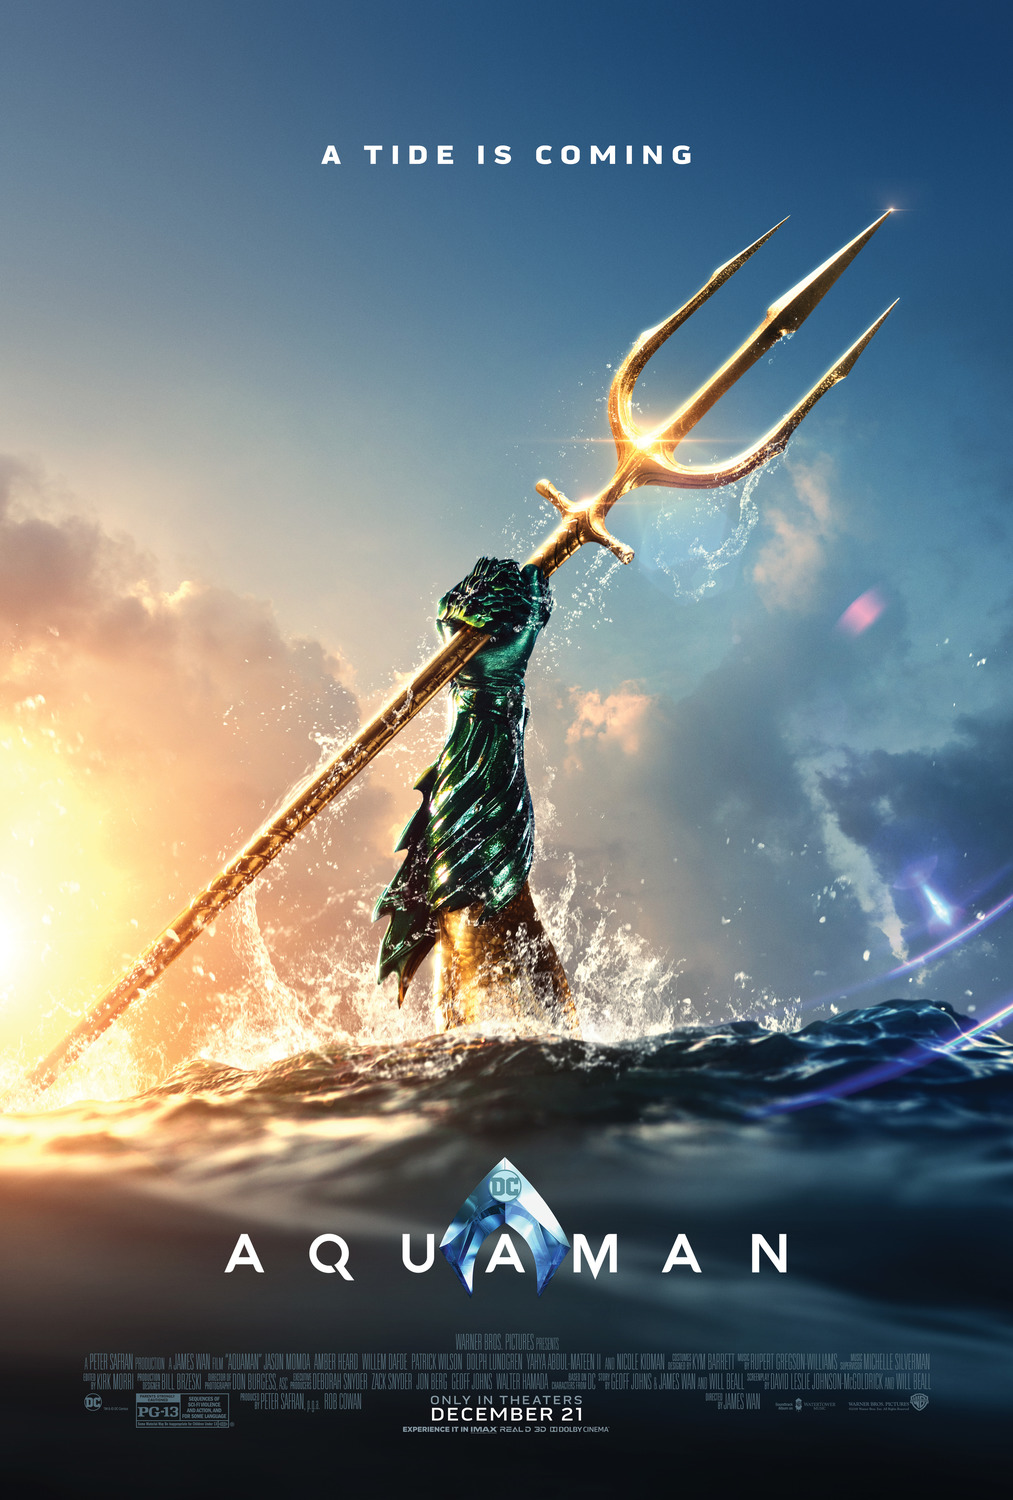 Aquaman tops box office second weekend